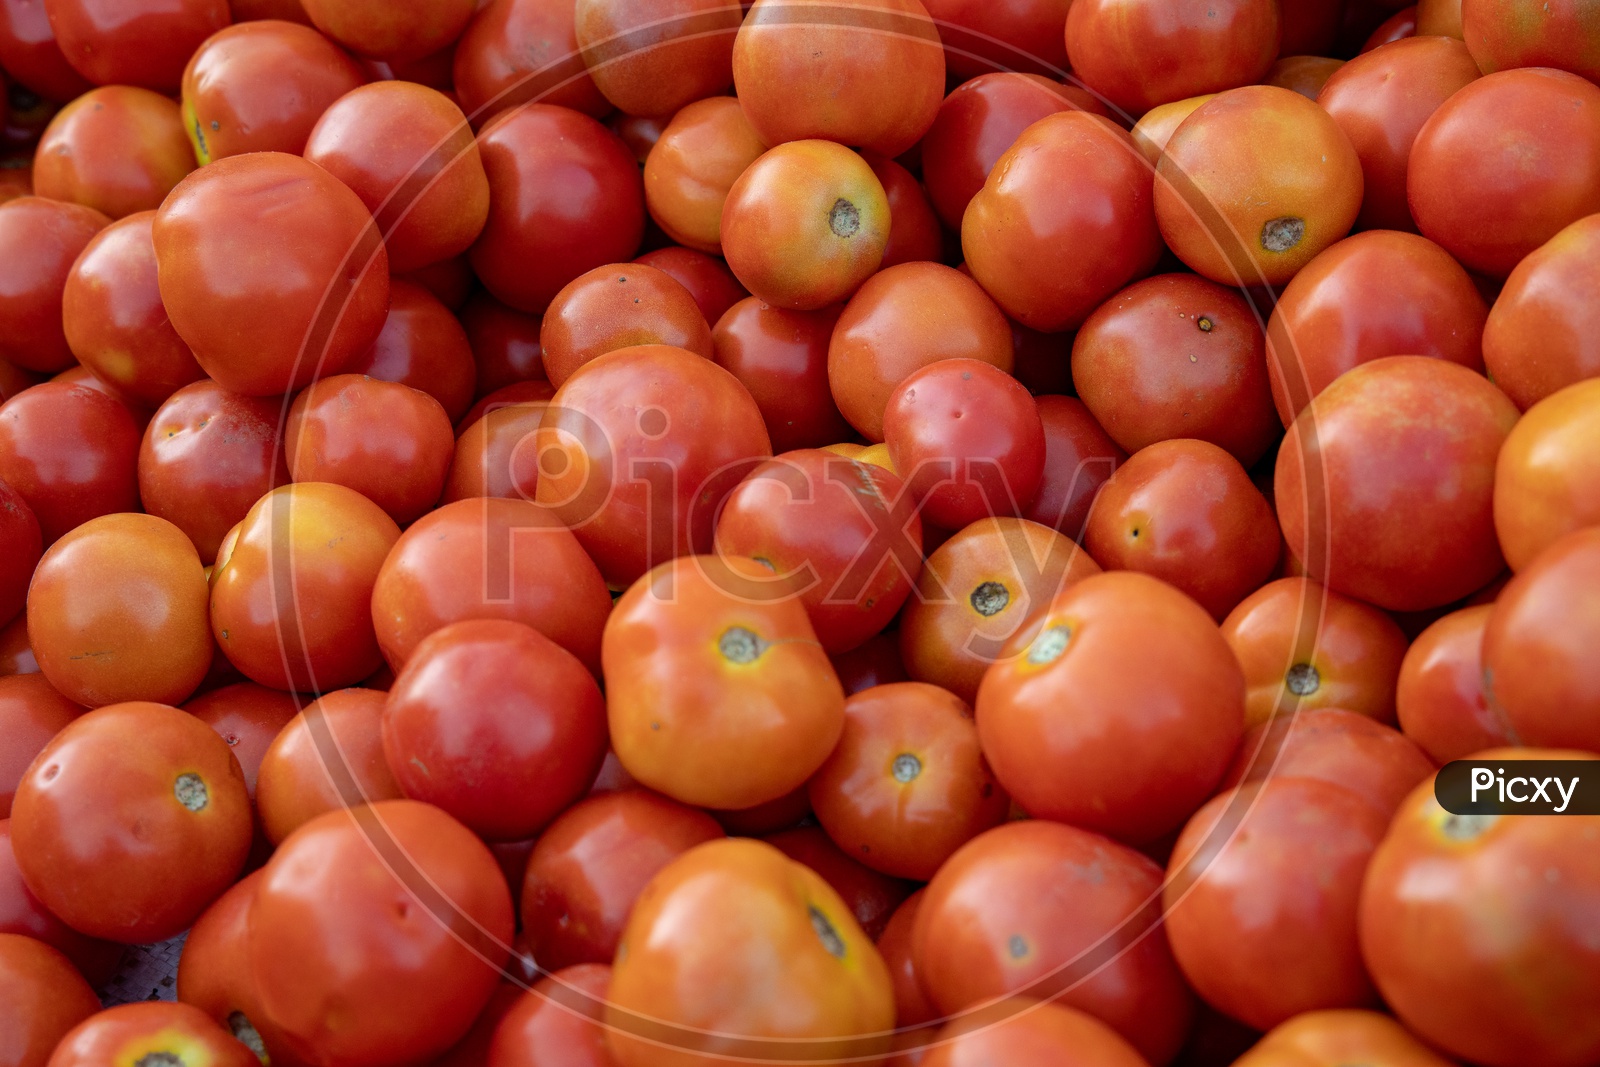 Tomatoes  In a Vegetable Vendor Stall